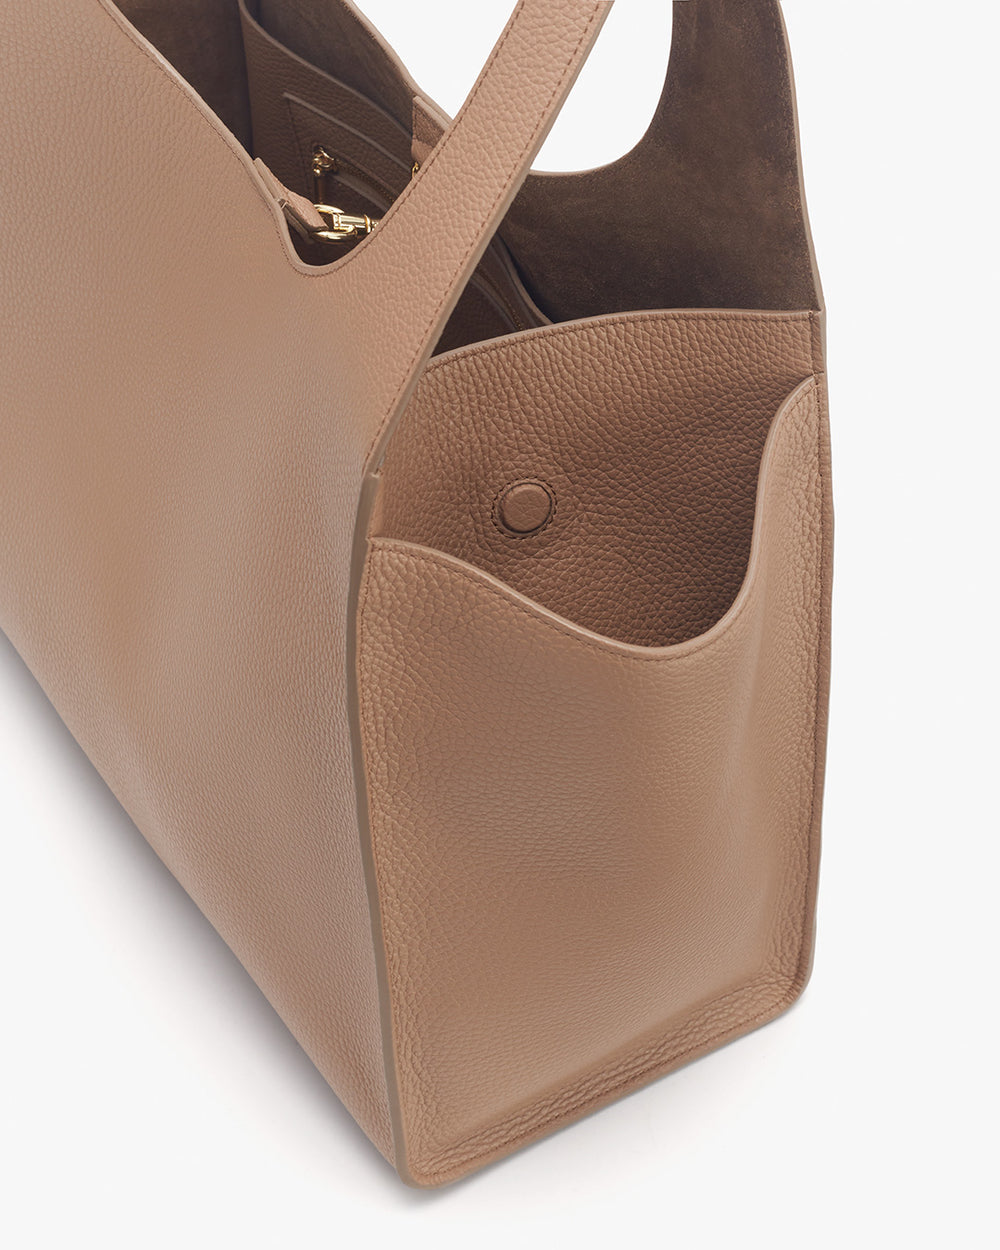 Close-up view of a handbag with open top and side pocket.